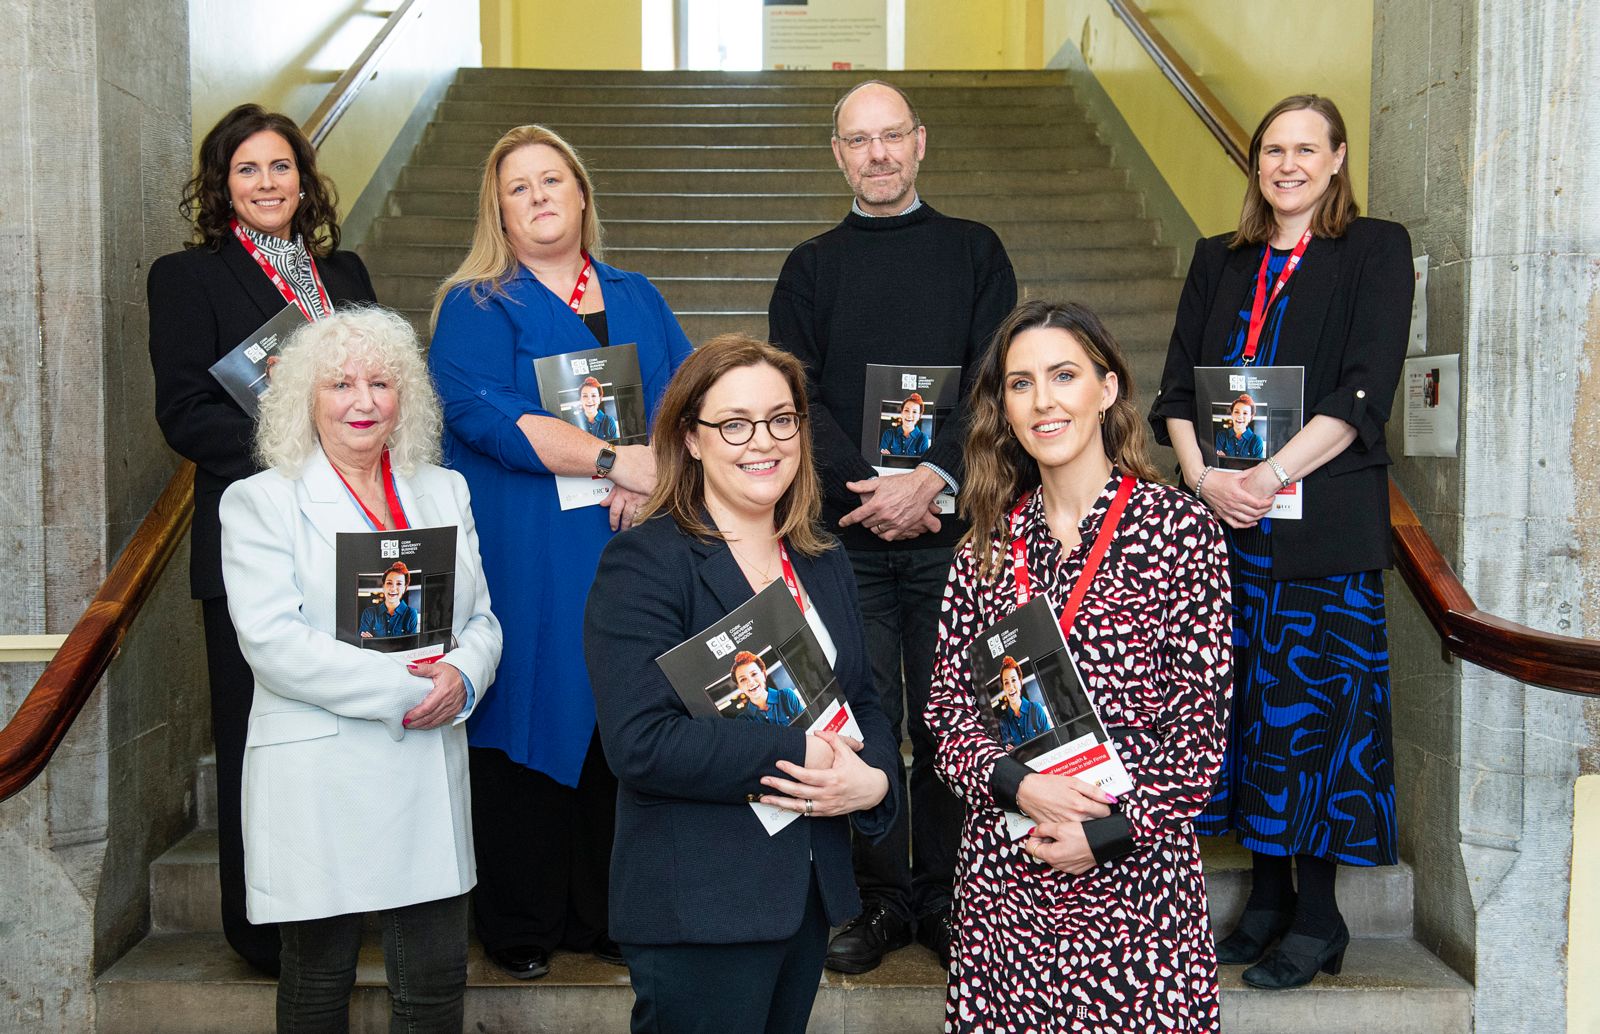 Members of the Healthy Workplace Ireland Report launch pose with the published results